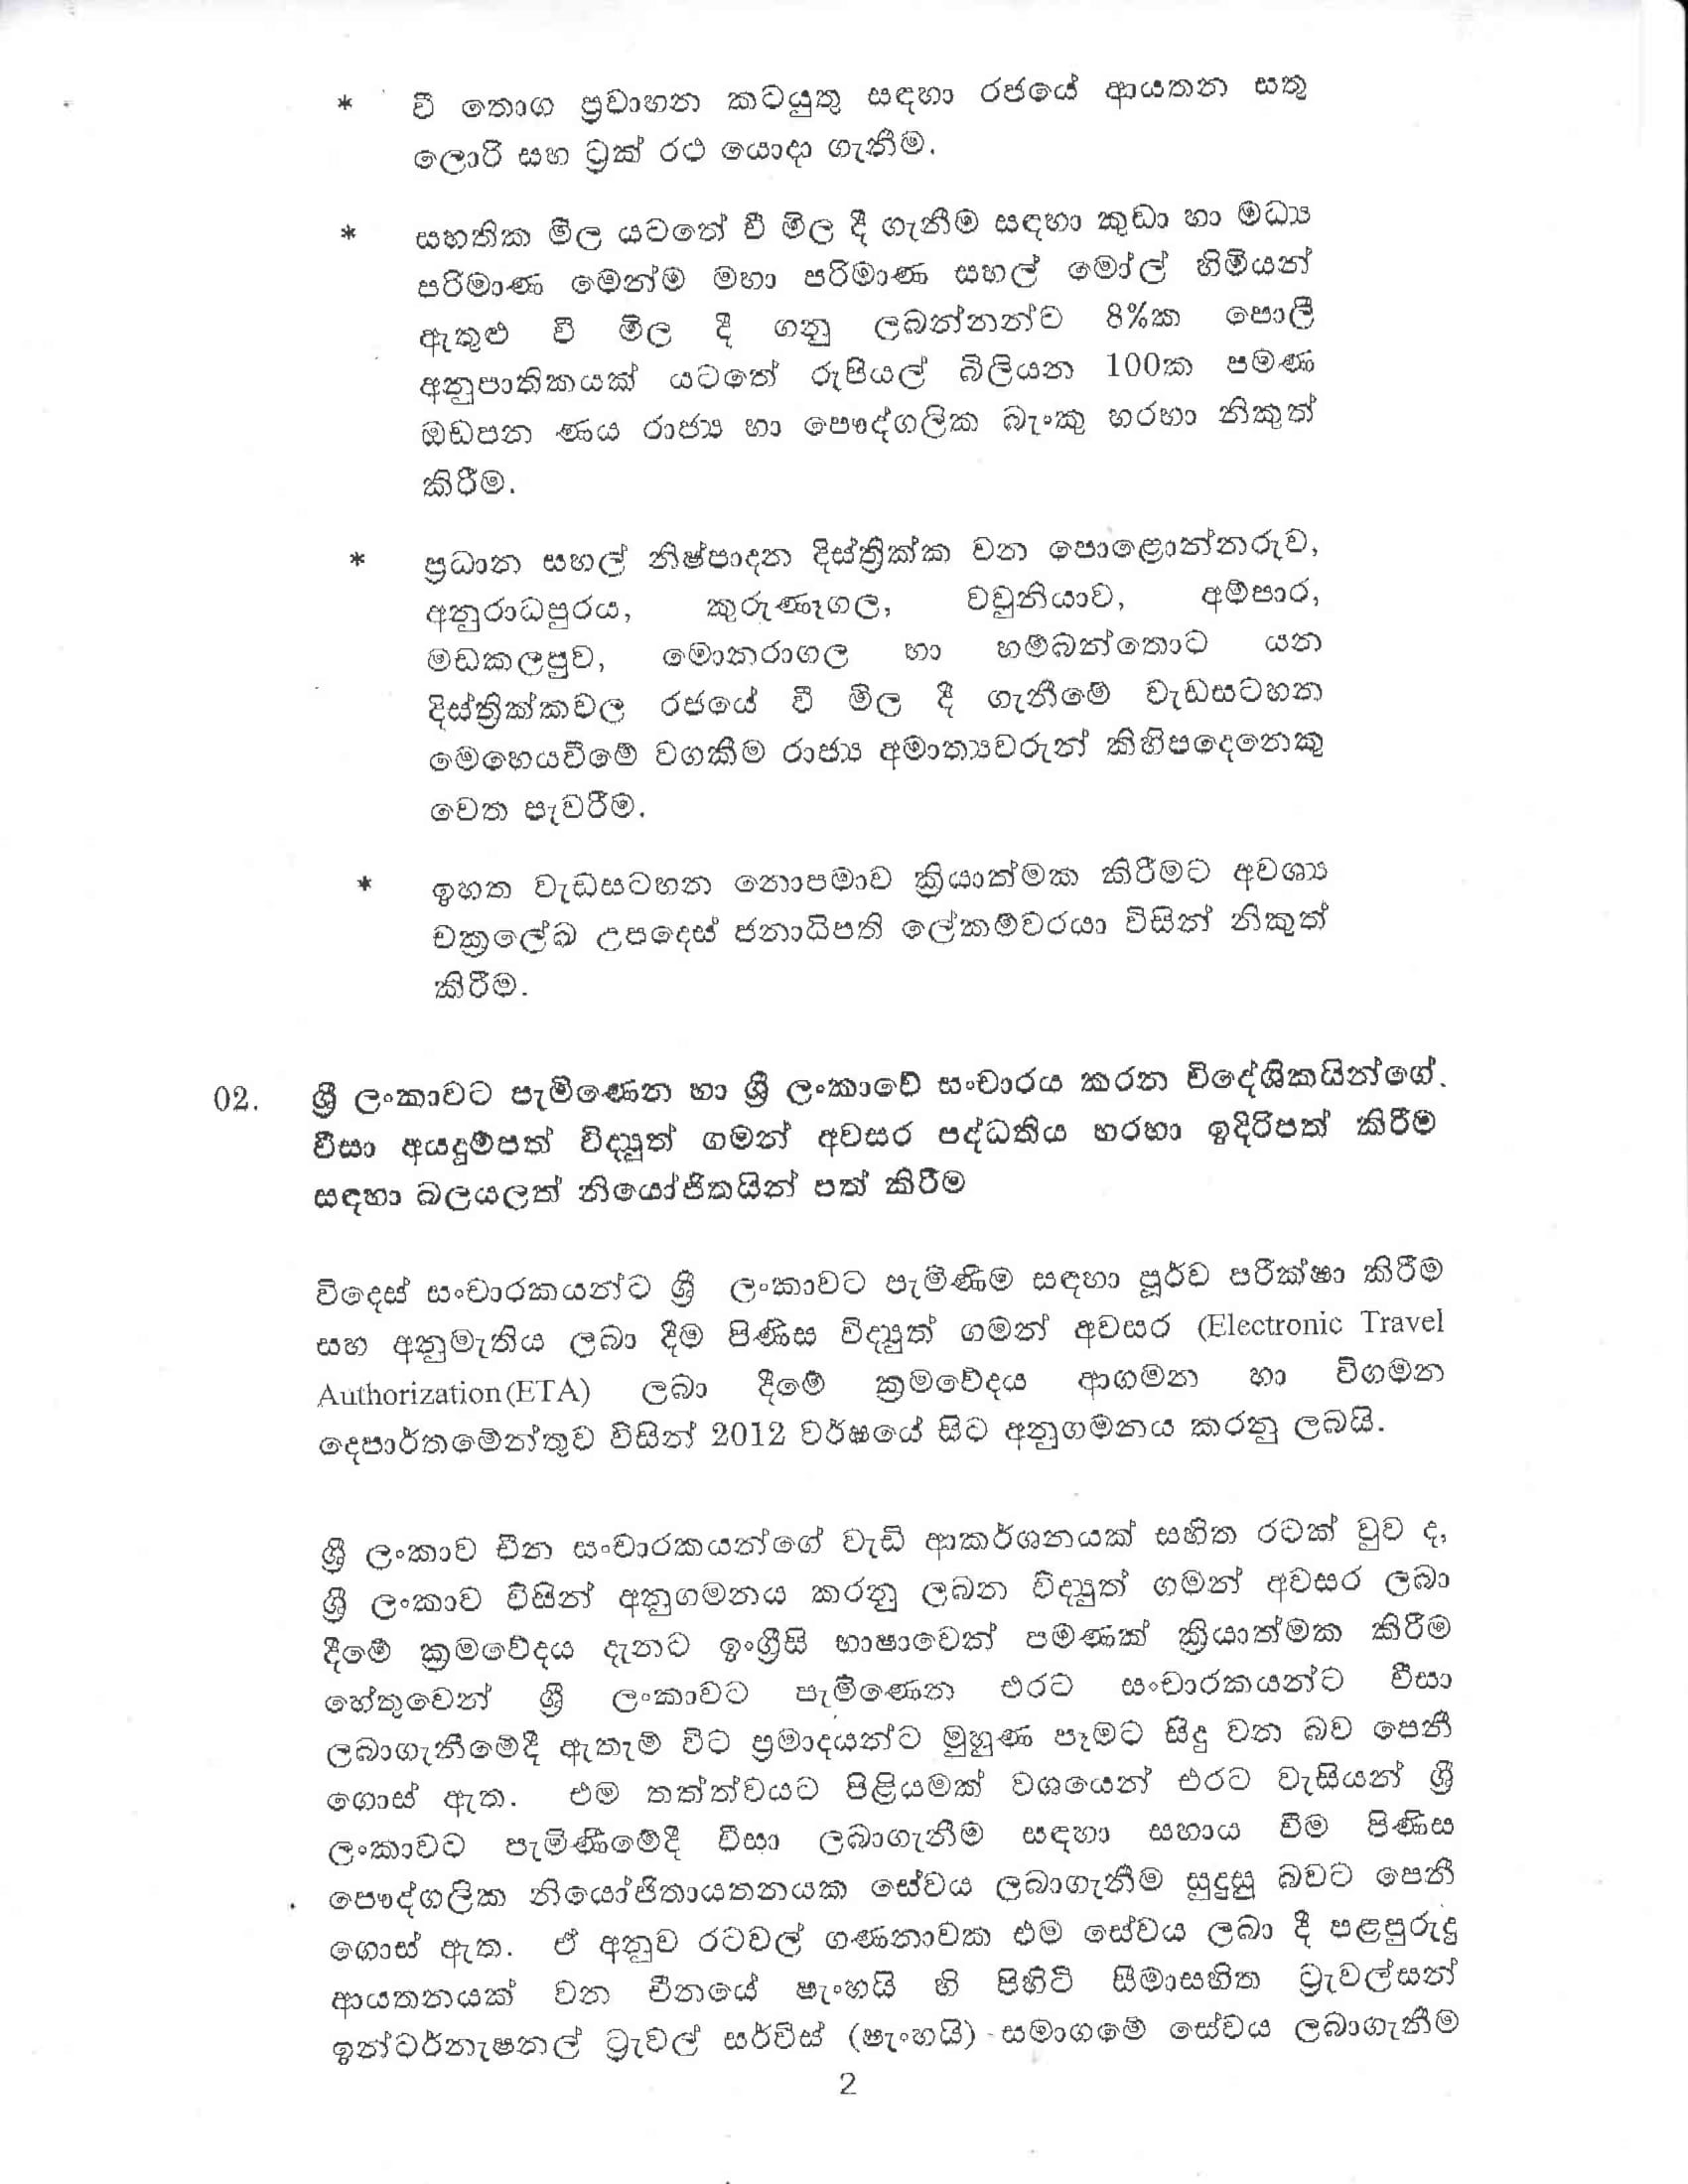 Cabinet Decision on 22.01.2020Full document 2